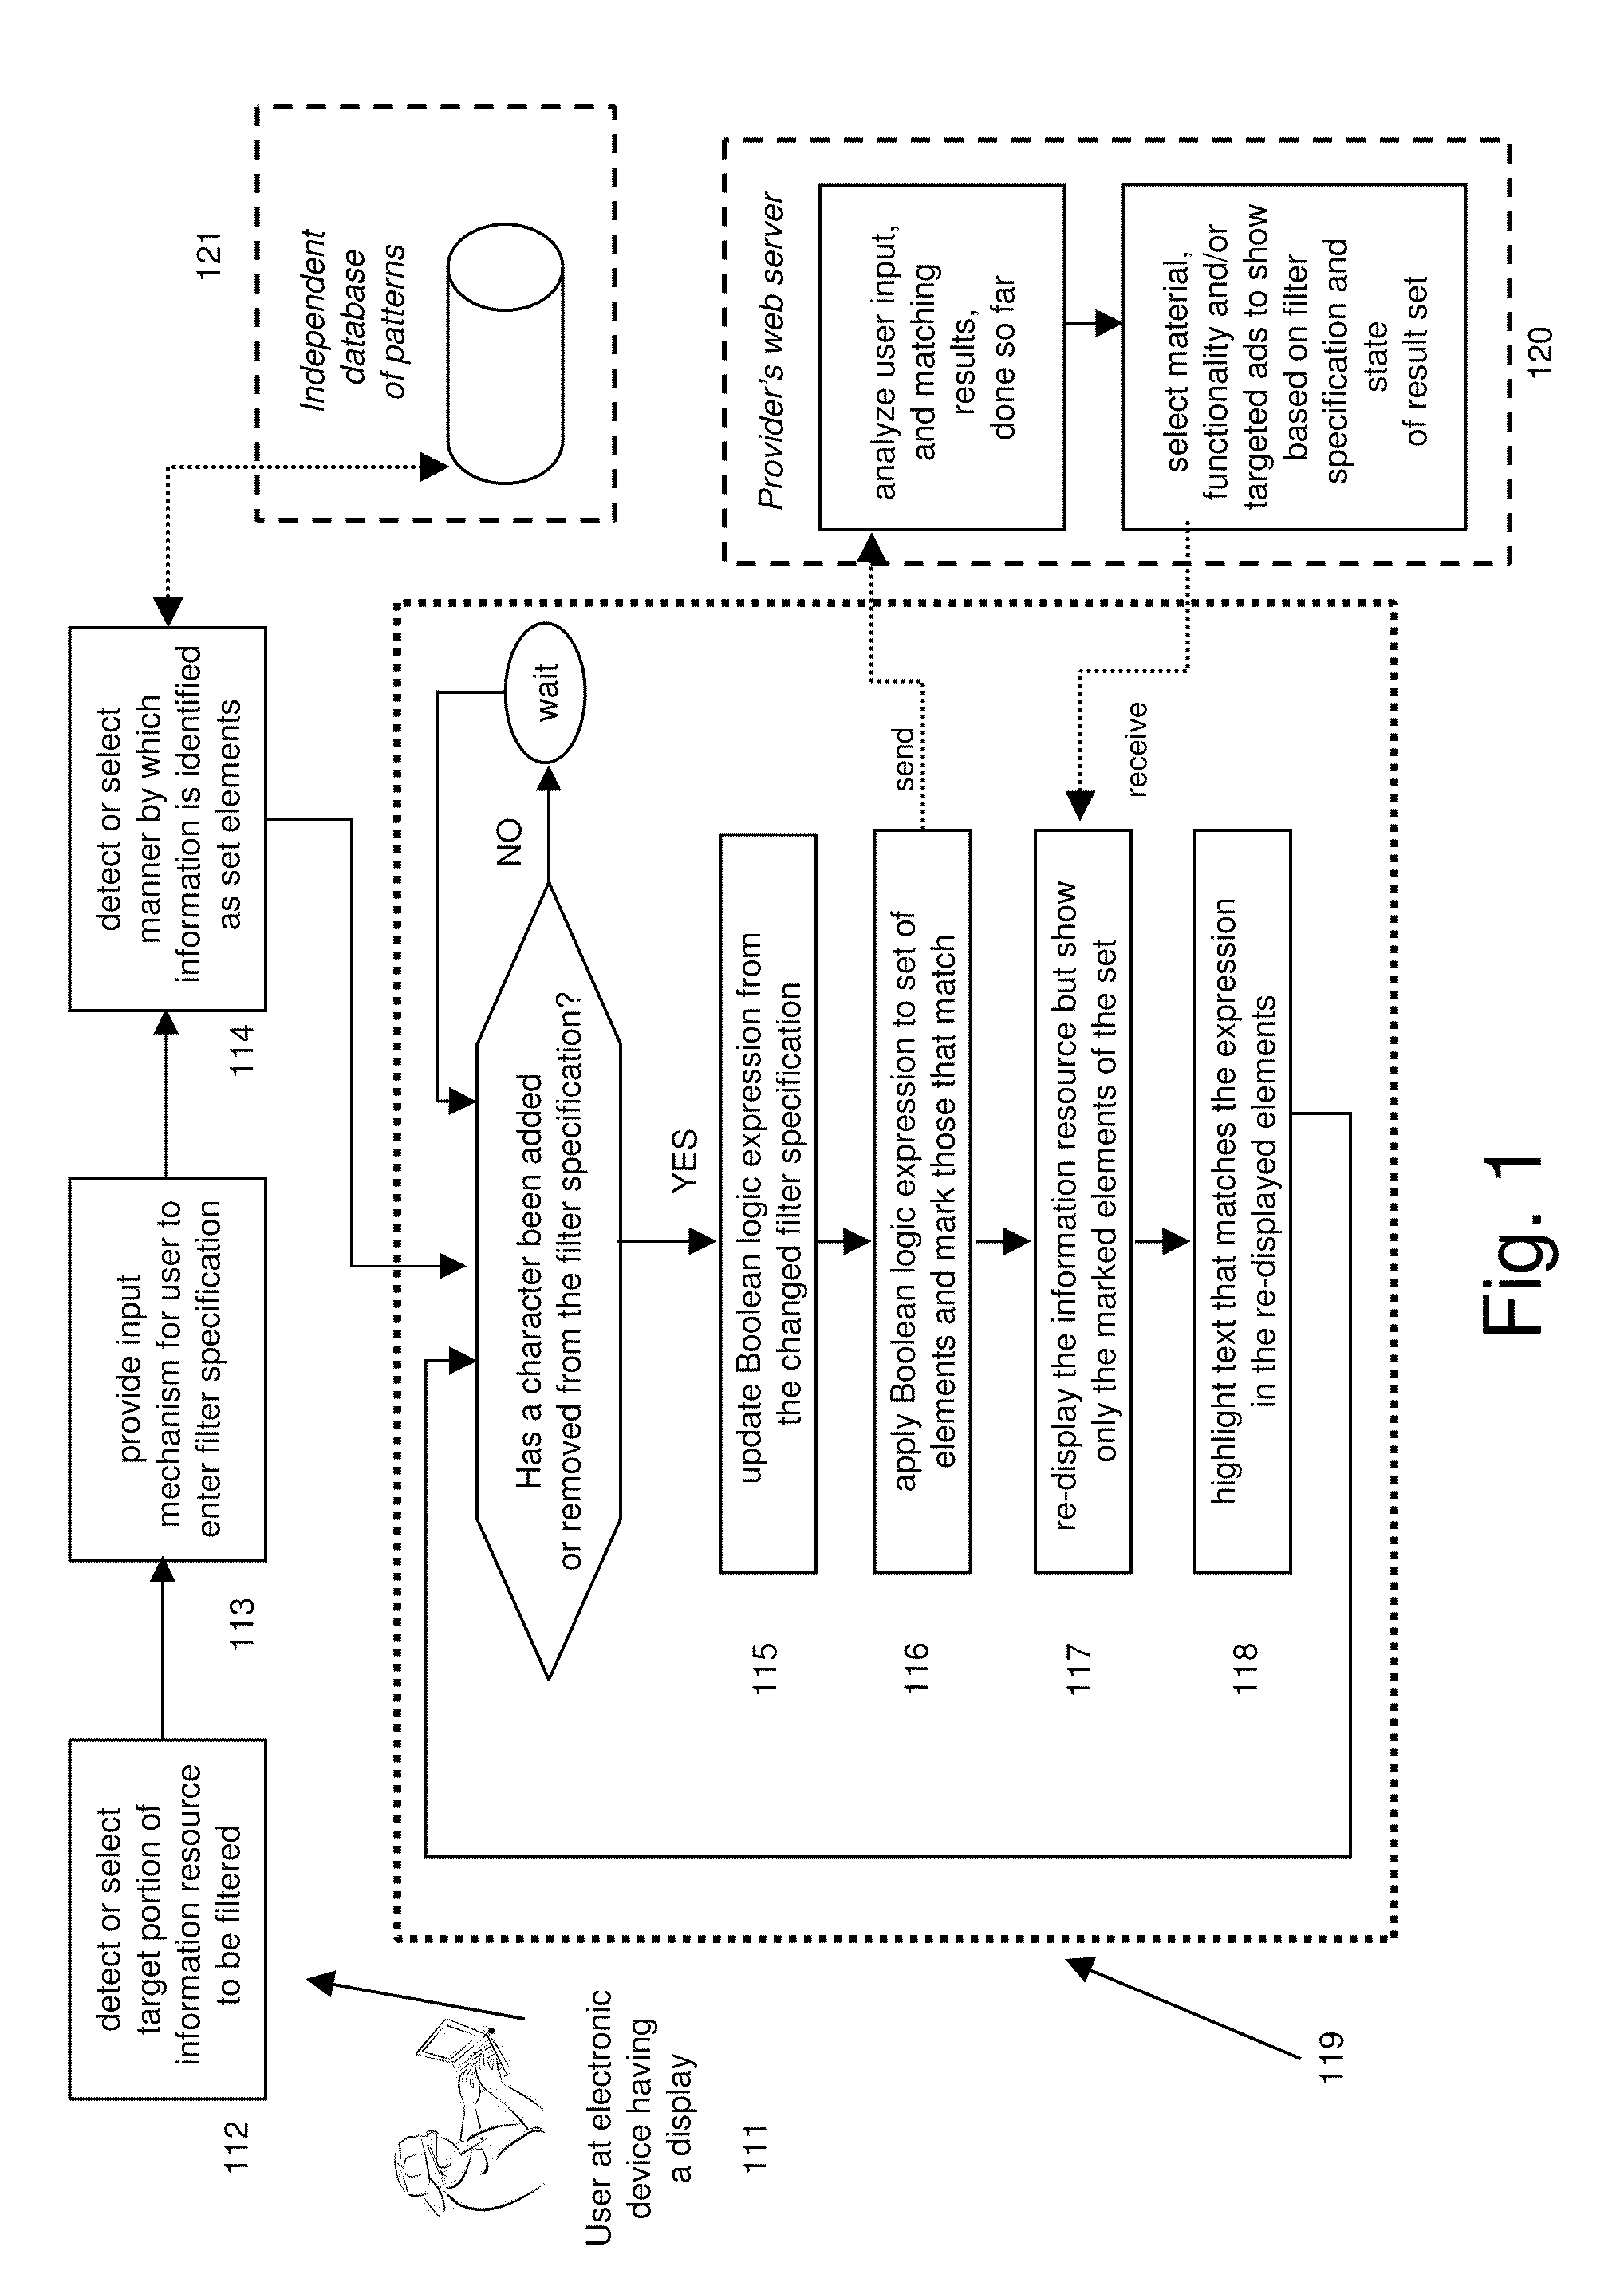 Method and system for filtering information